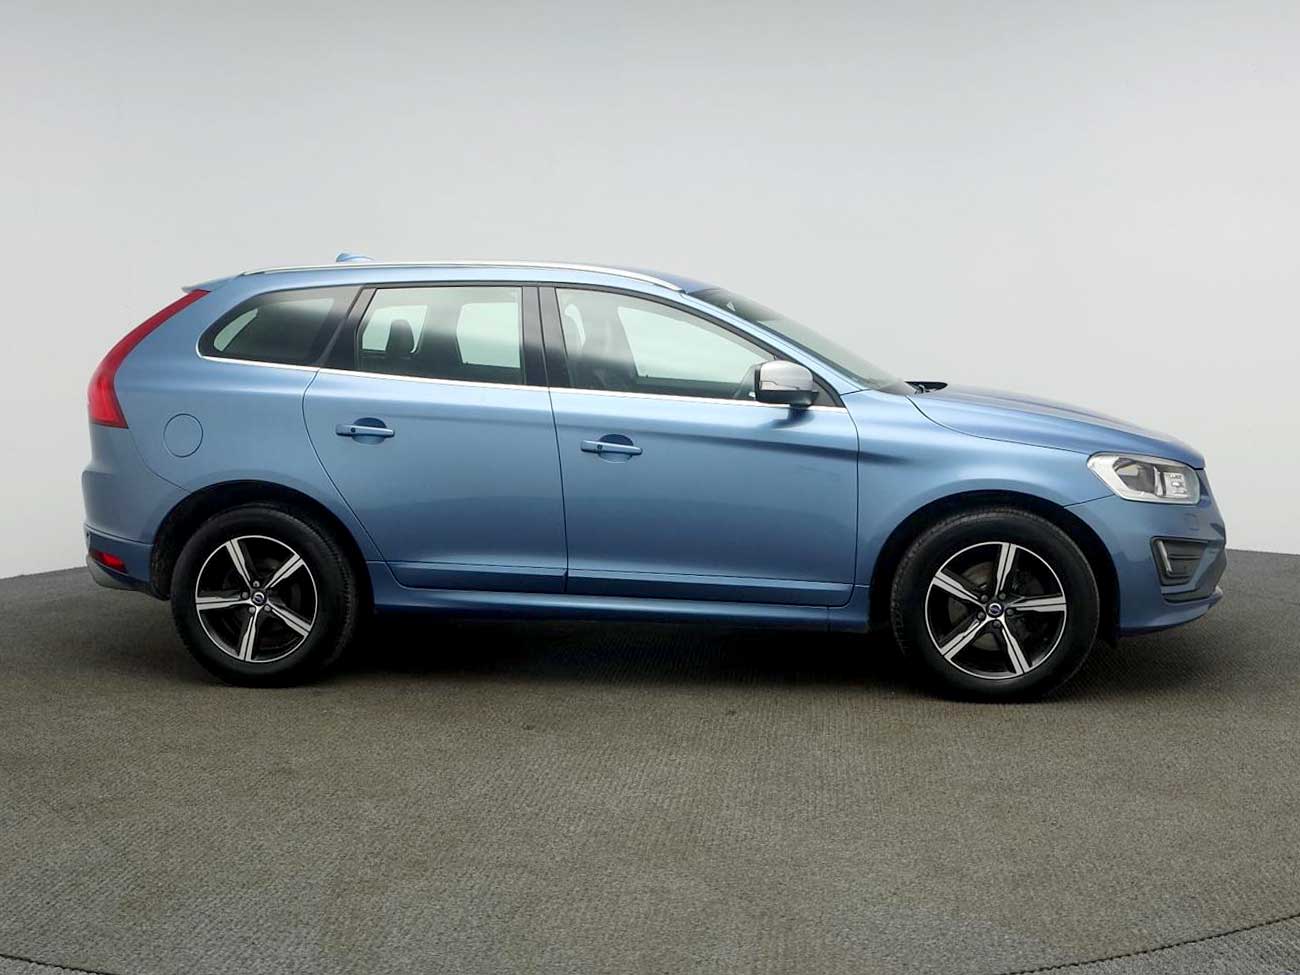 Side view of a Volvo XC60 